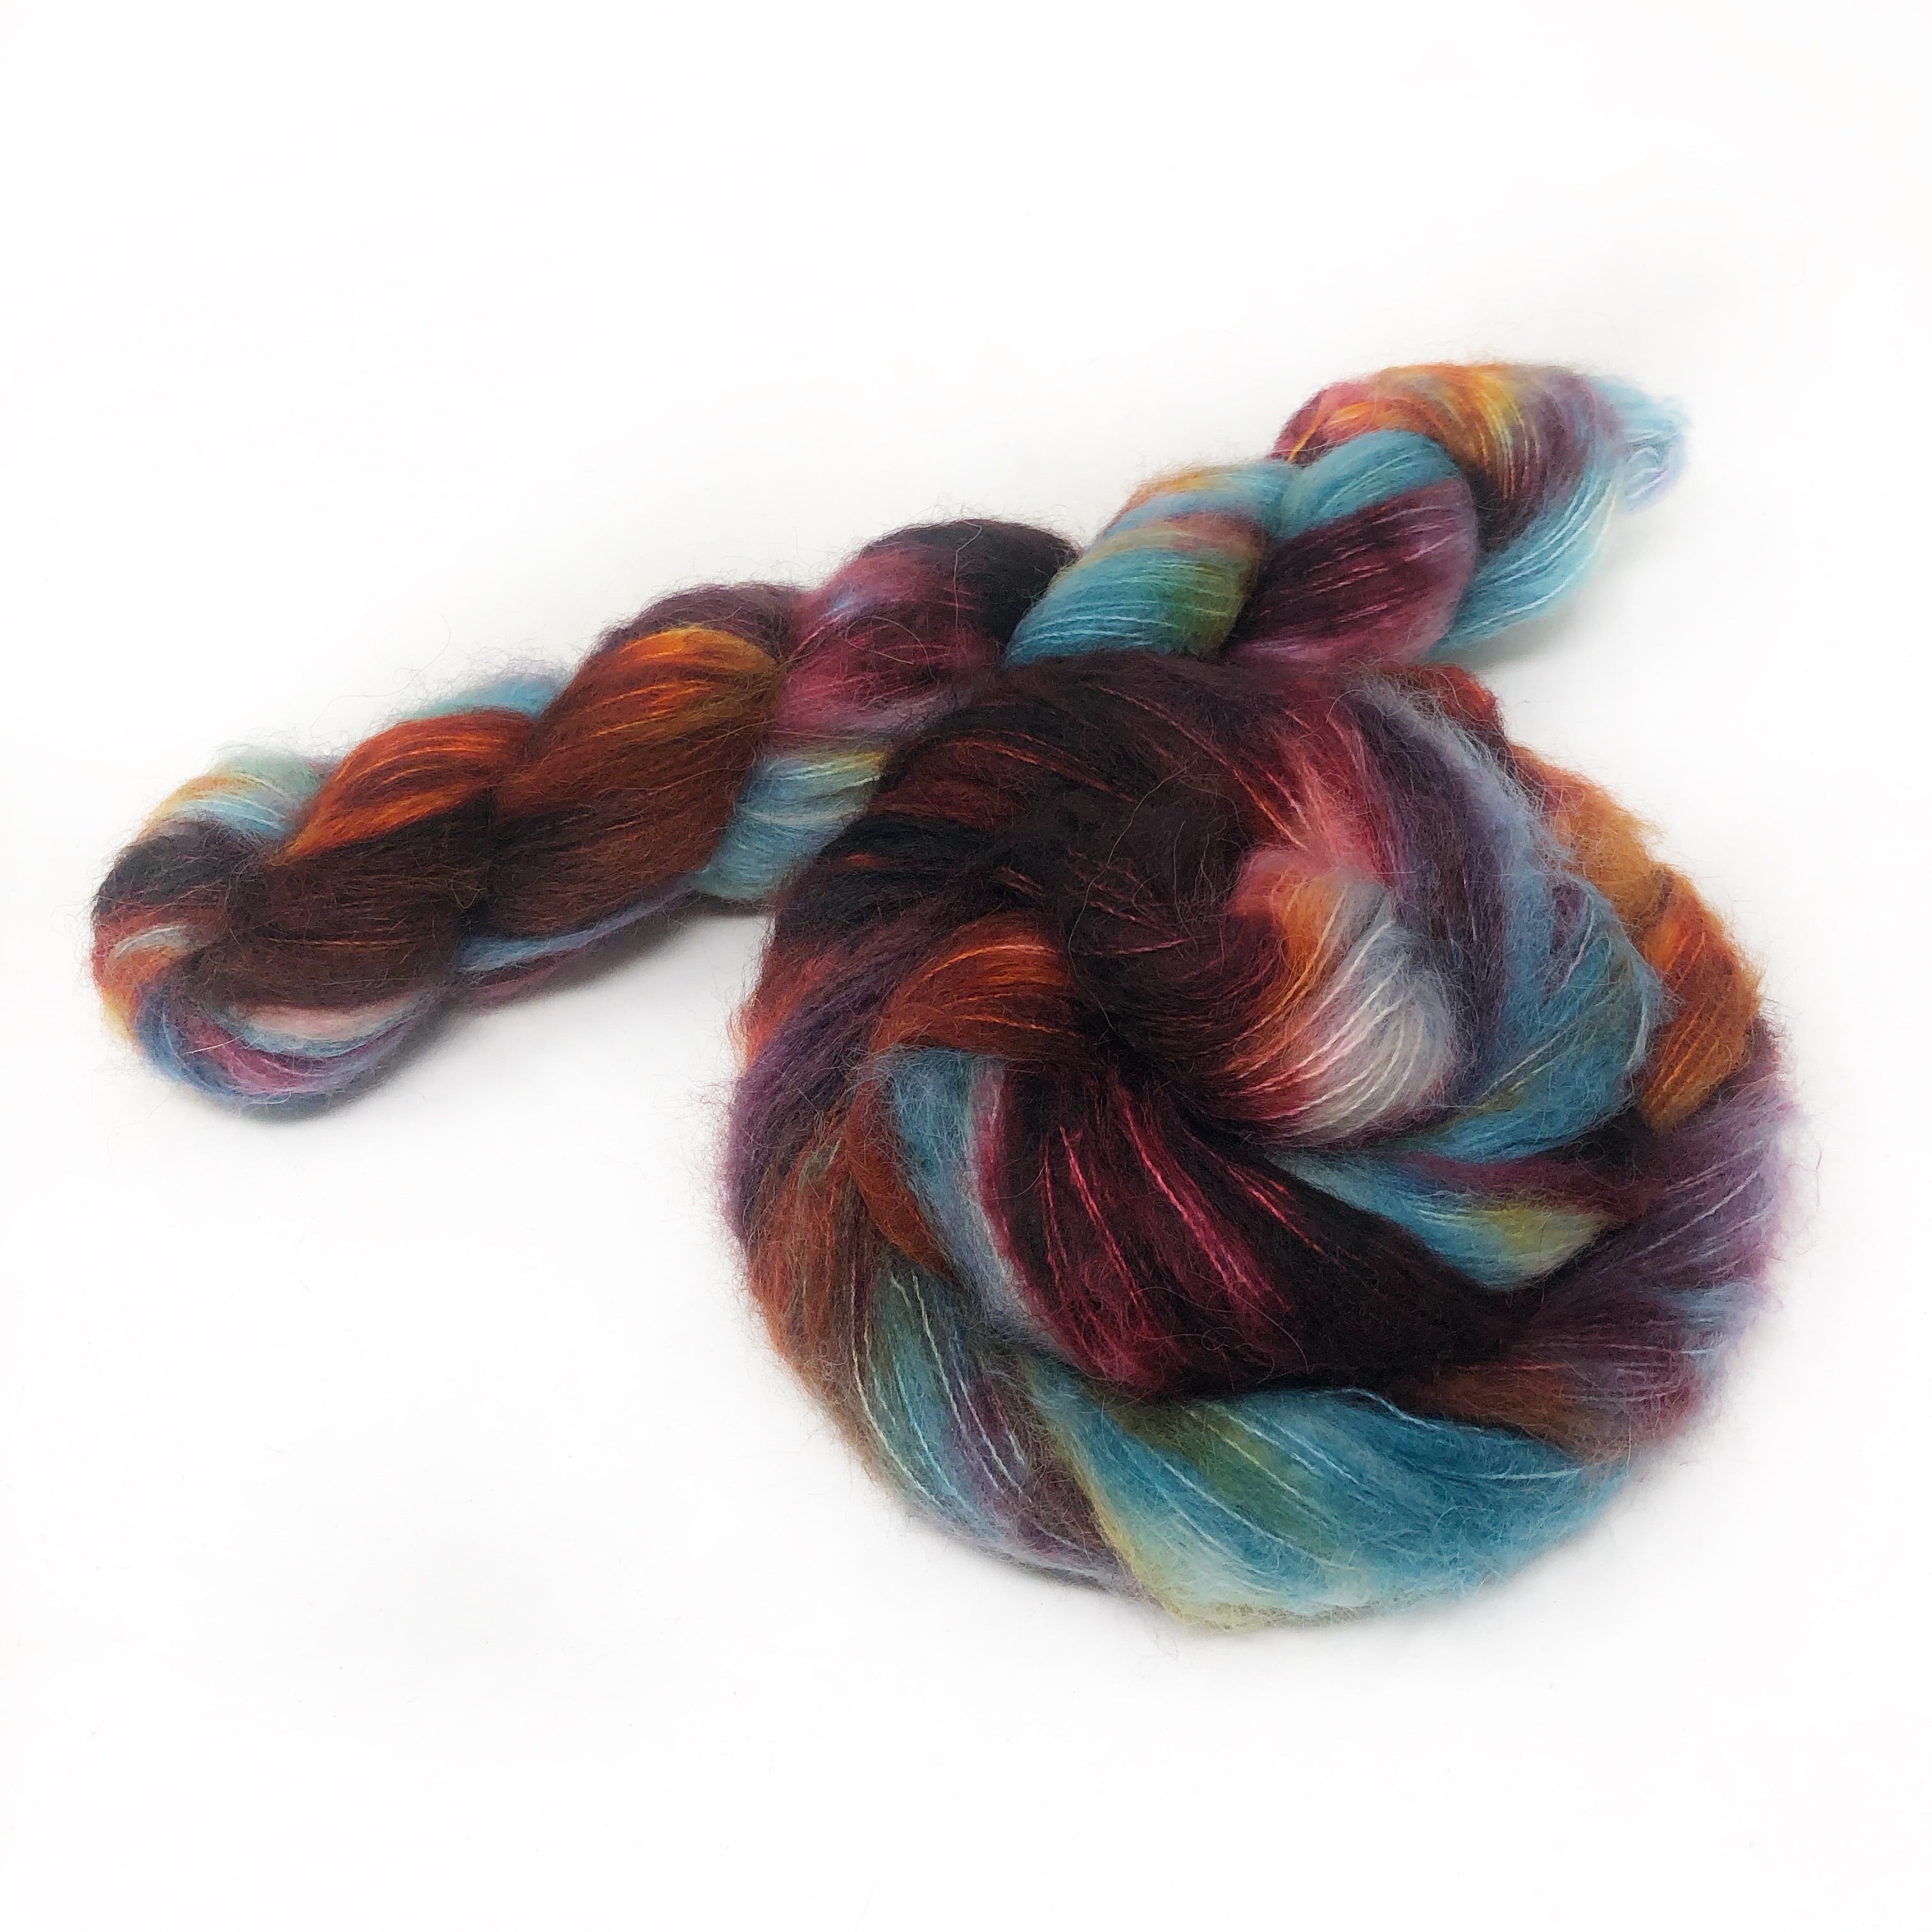 Sultry September - Halo Silk Laceweight